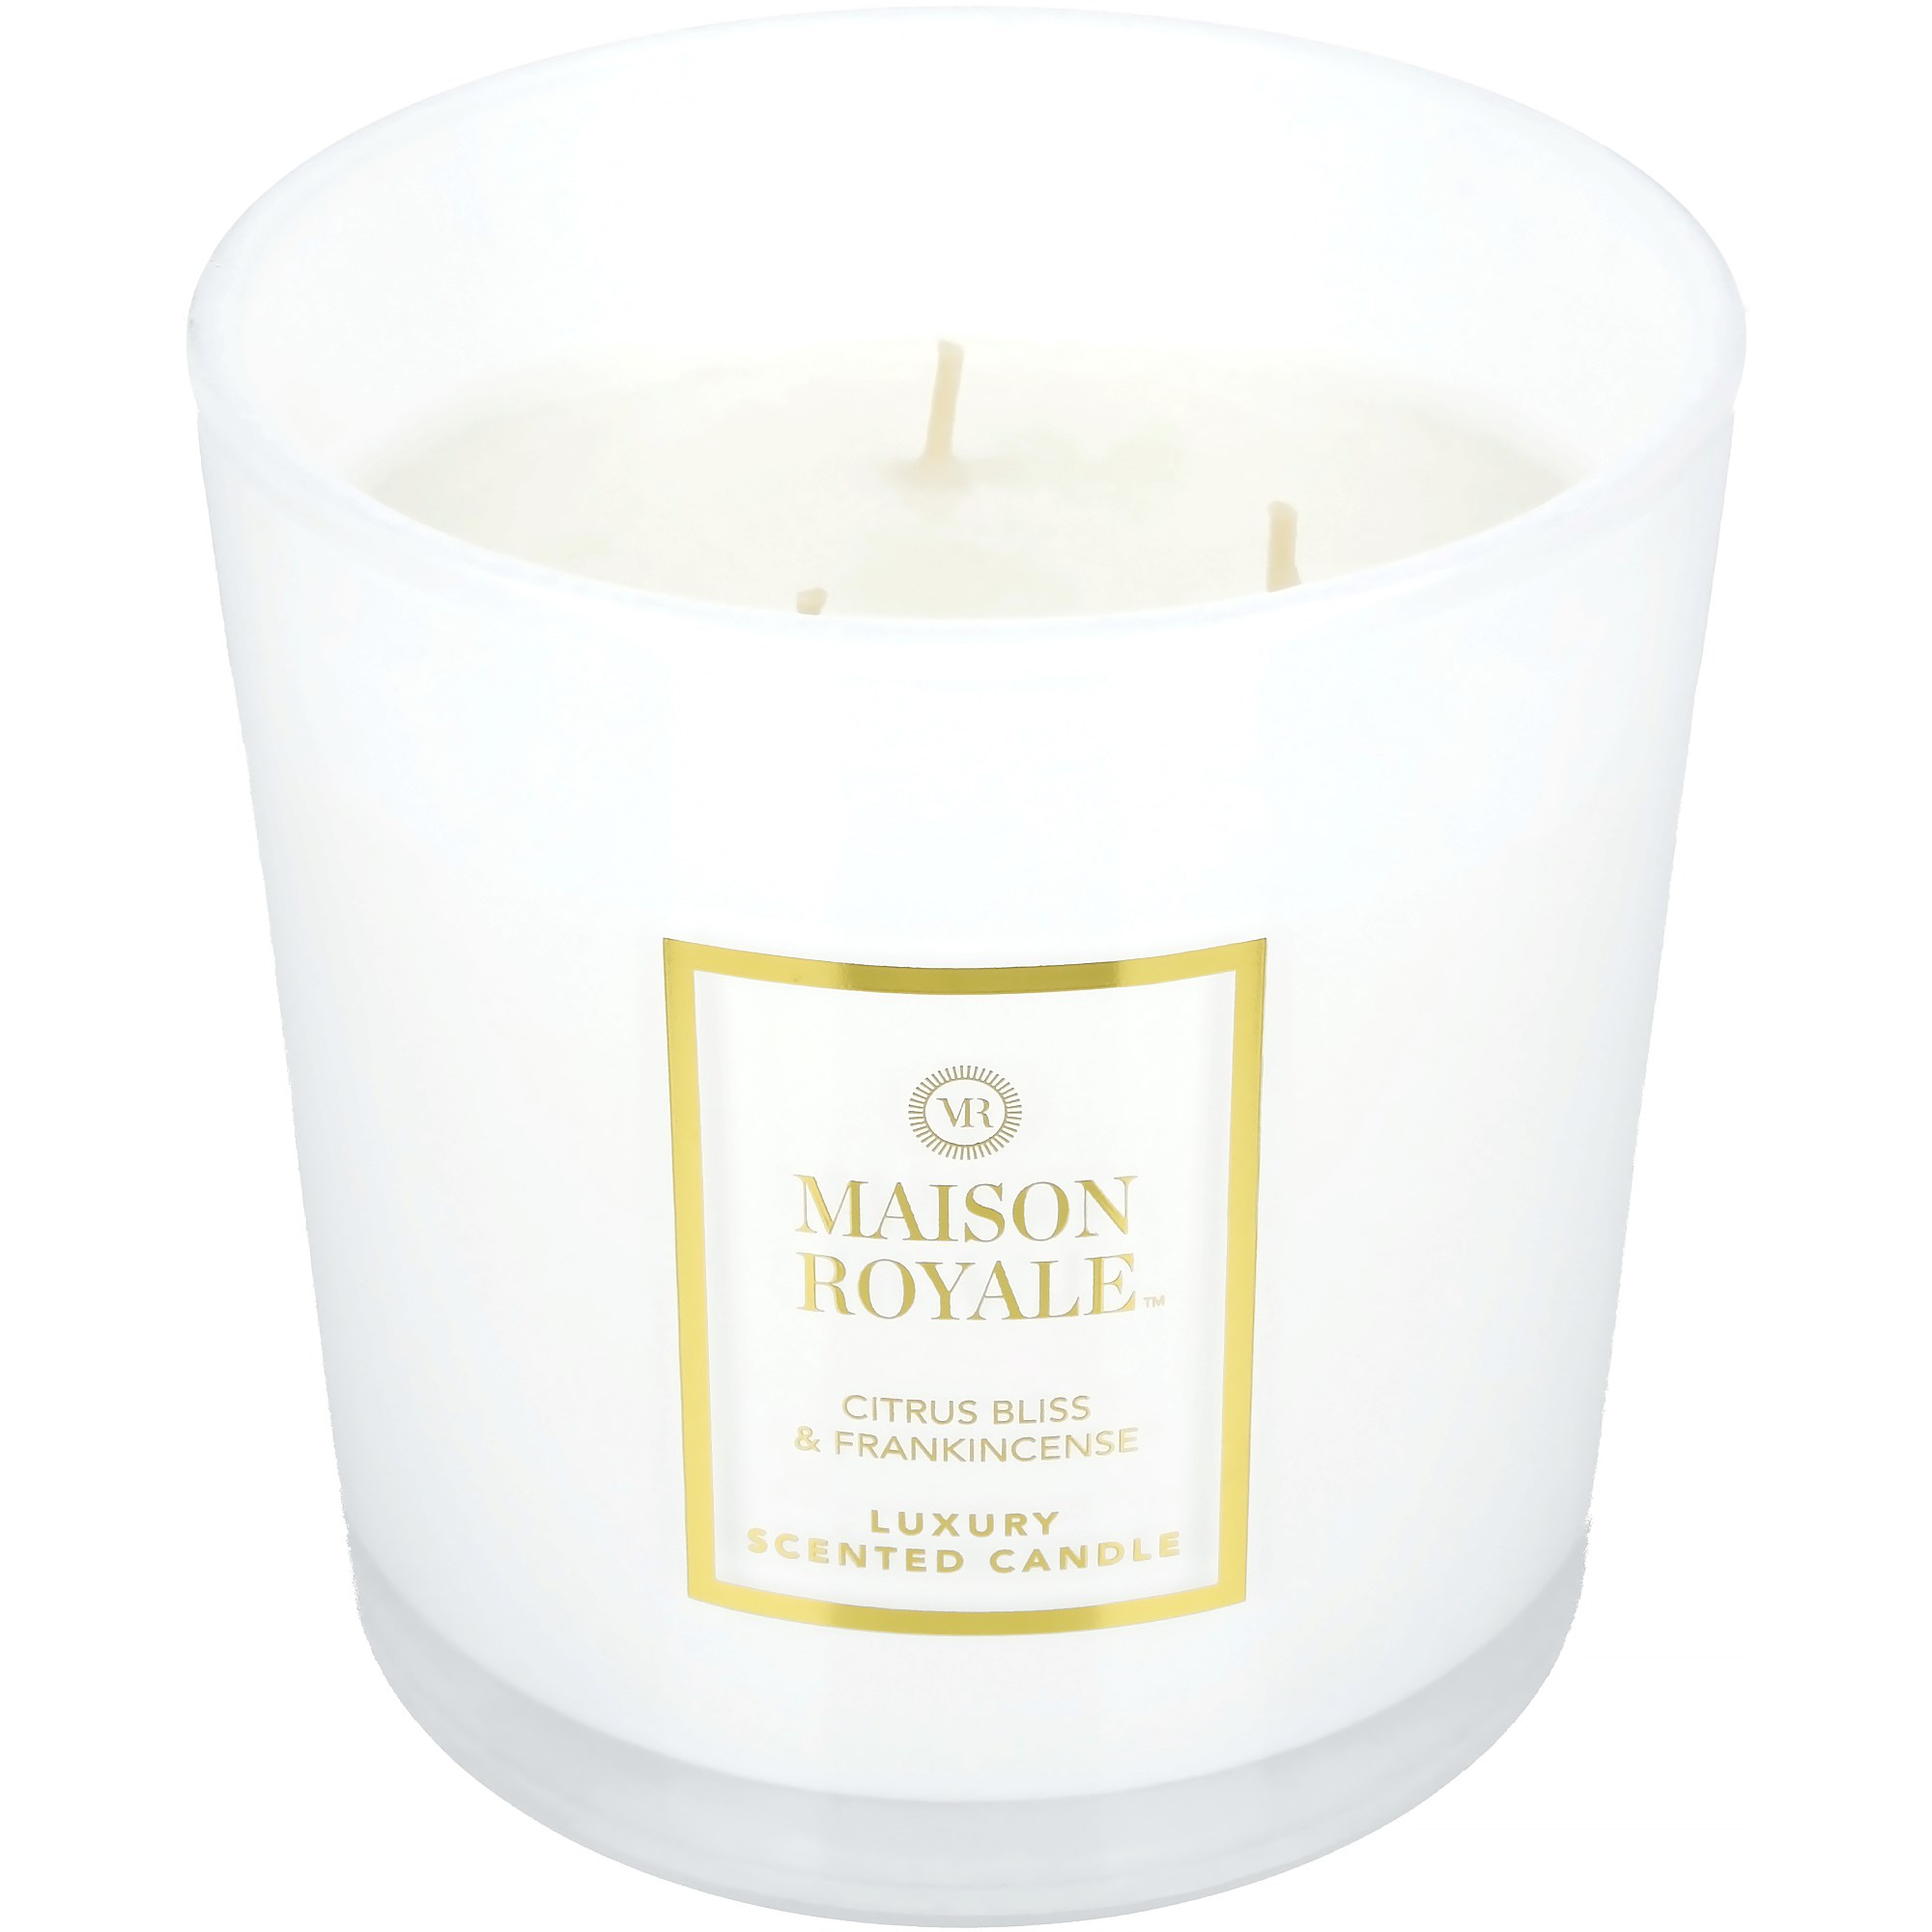 Läs mer om No Brand Maison Royale Luxury Scented Candle 600 st